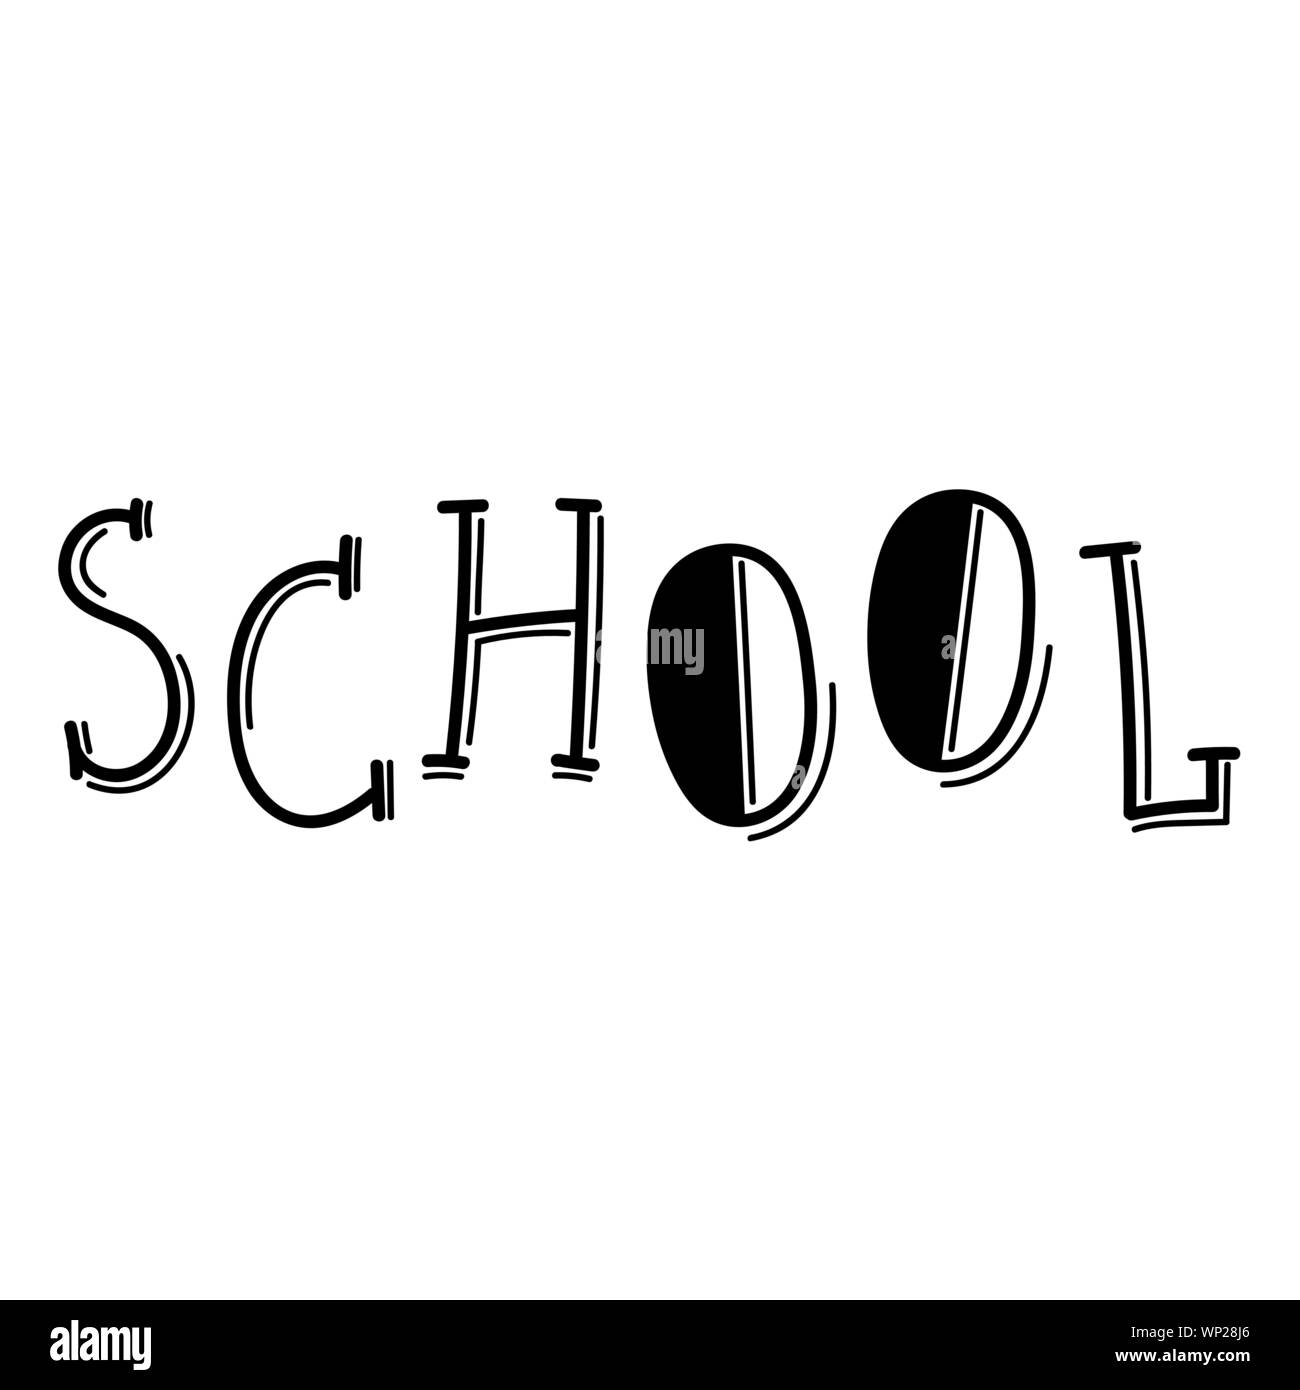 School lettering typography modern cool design style Stock Vector Image ...